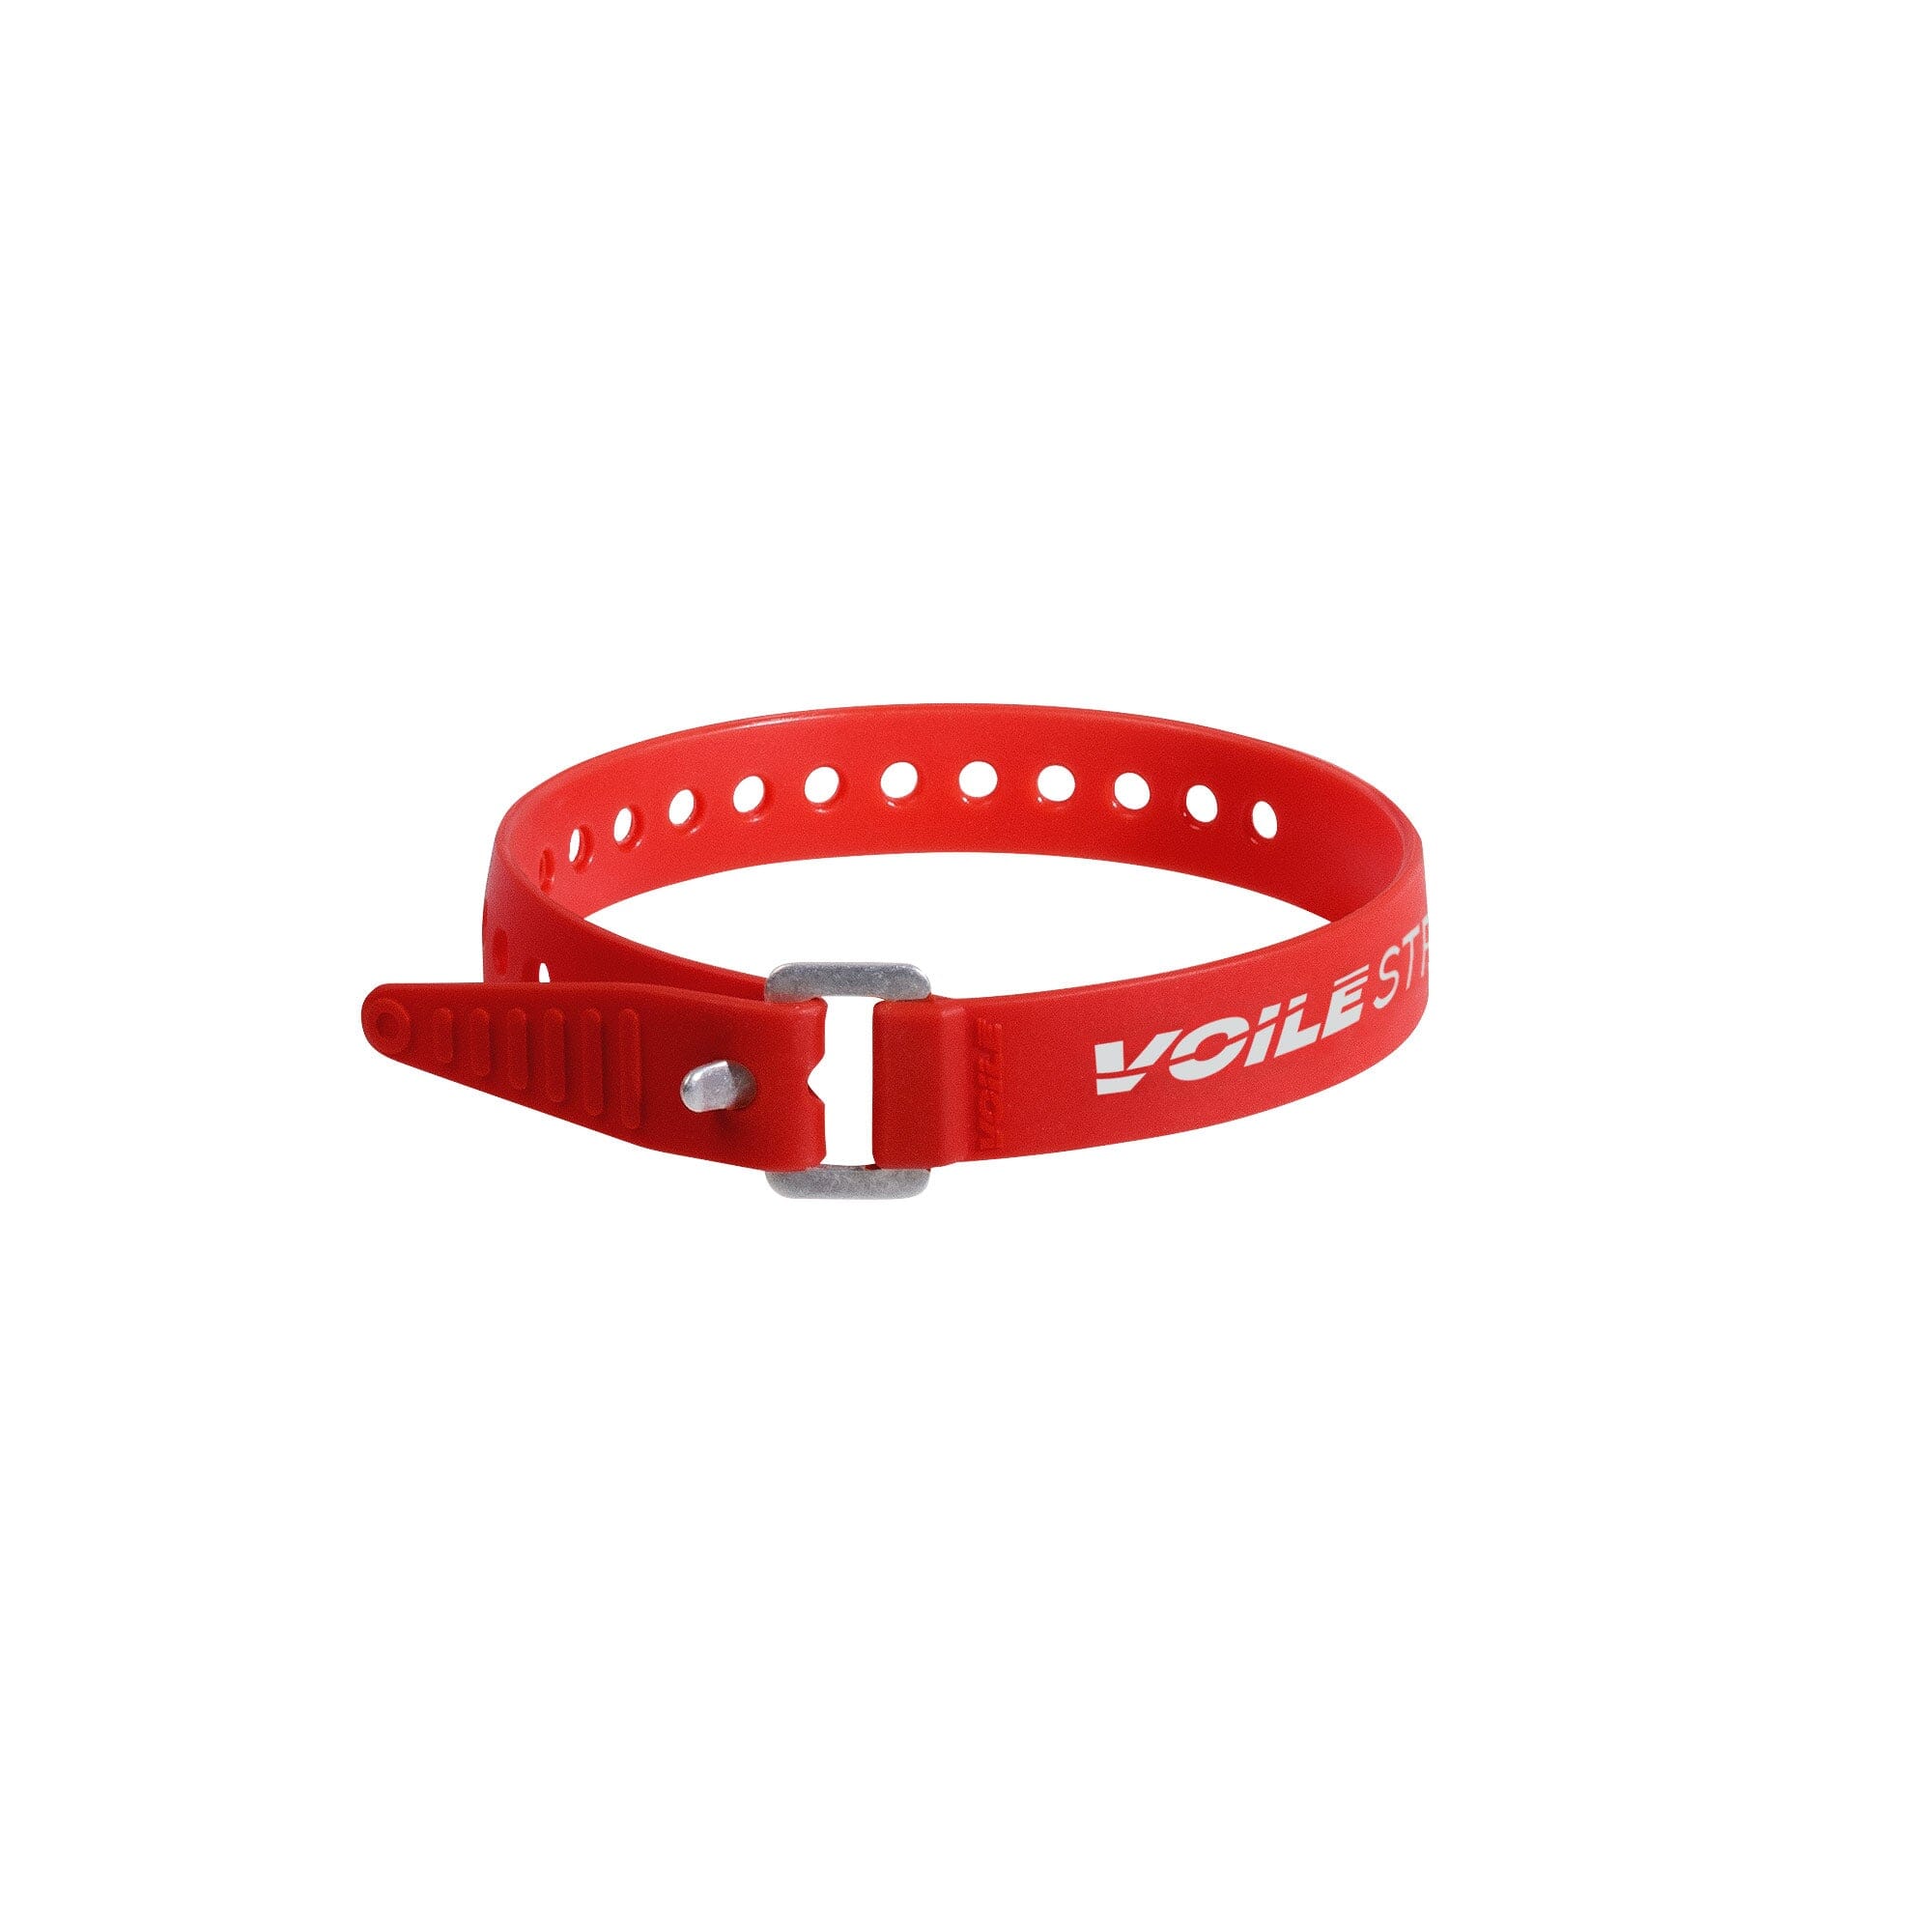 Voile Strap Aluminium Buckle BIKE STRAPS Melbourne Powered Electric Bikes 15 inch Red 